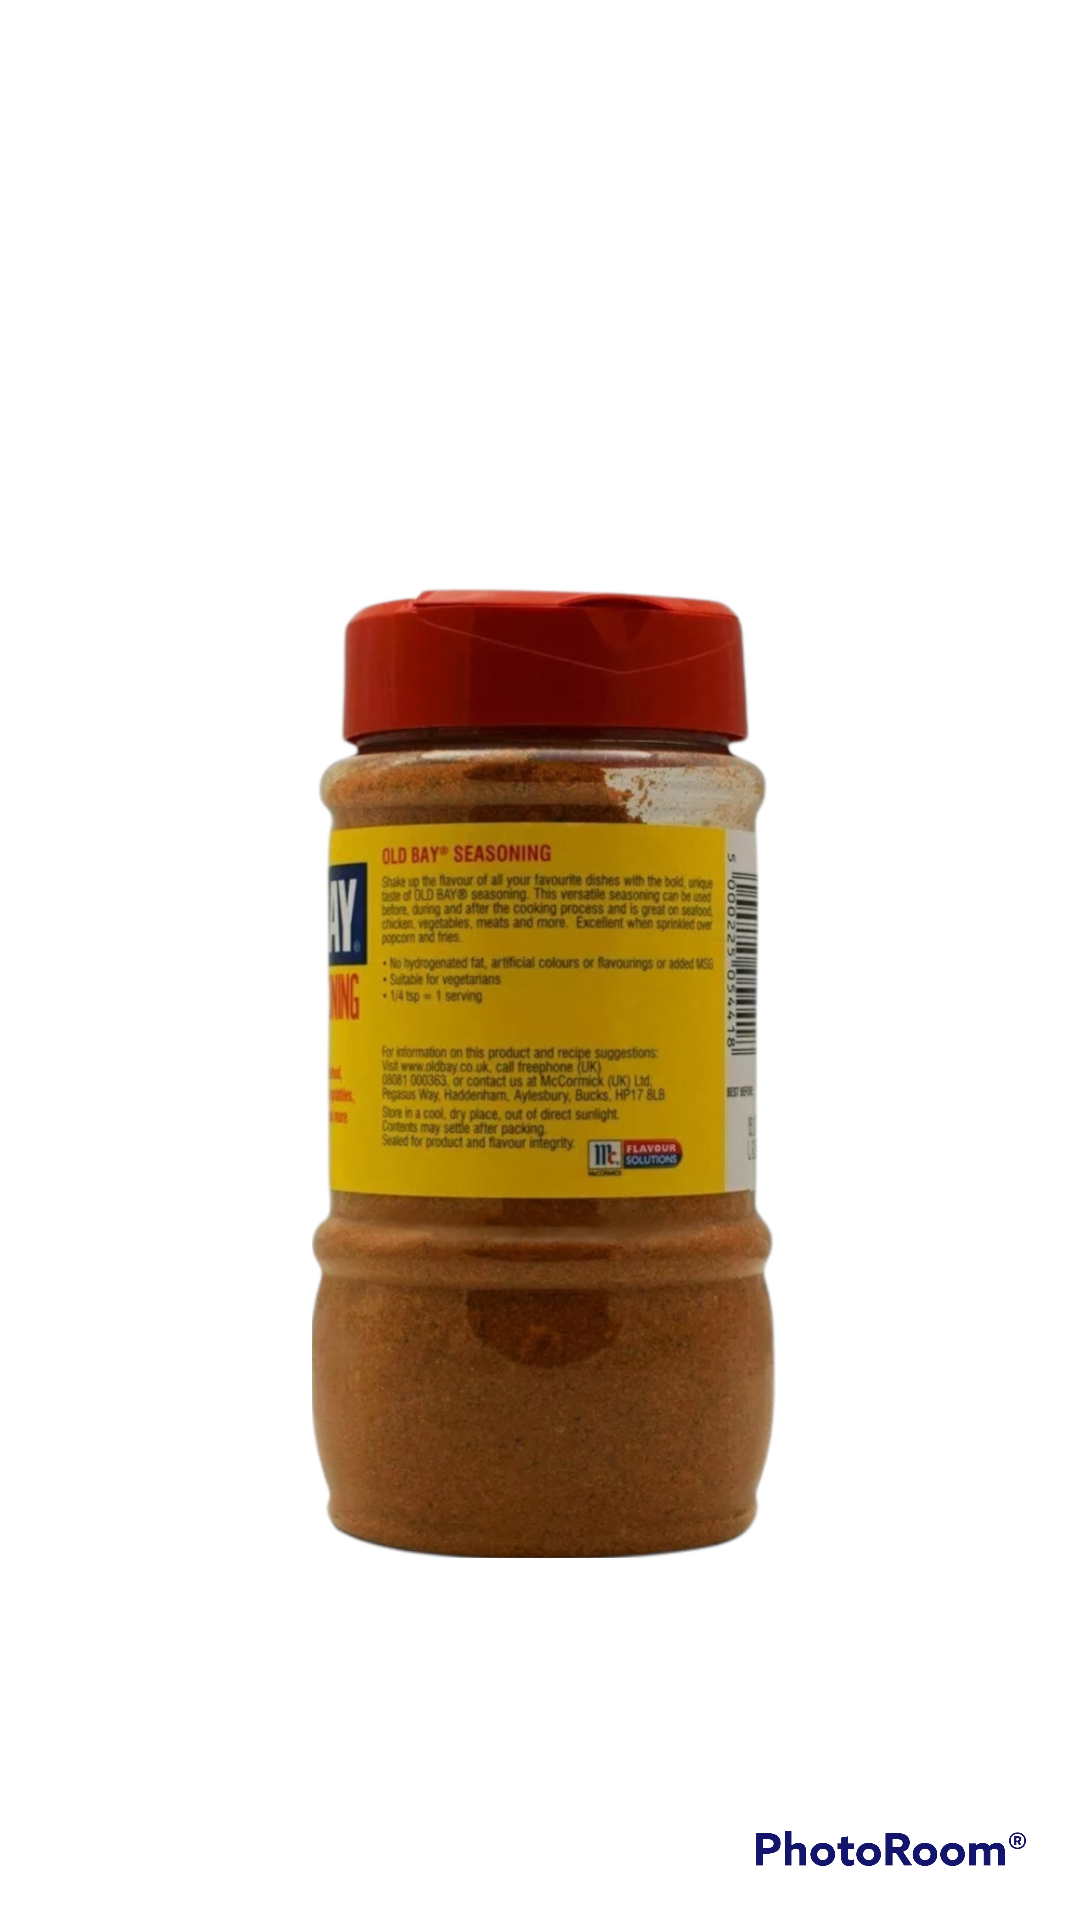 Old Bay Seasoning, Savoury Seasoning for Seafood and Chicken, 1x280g